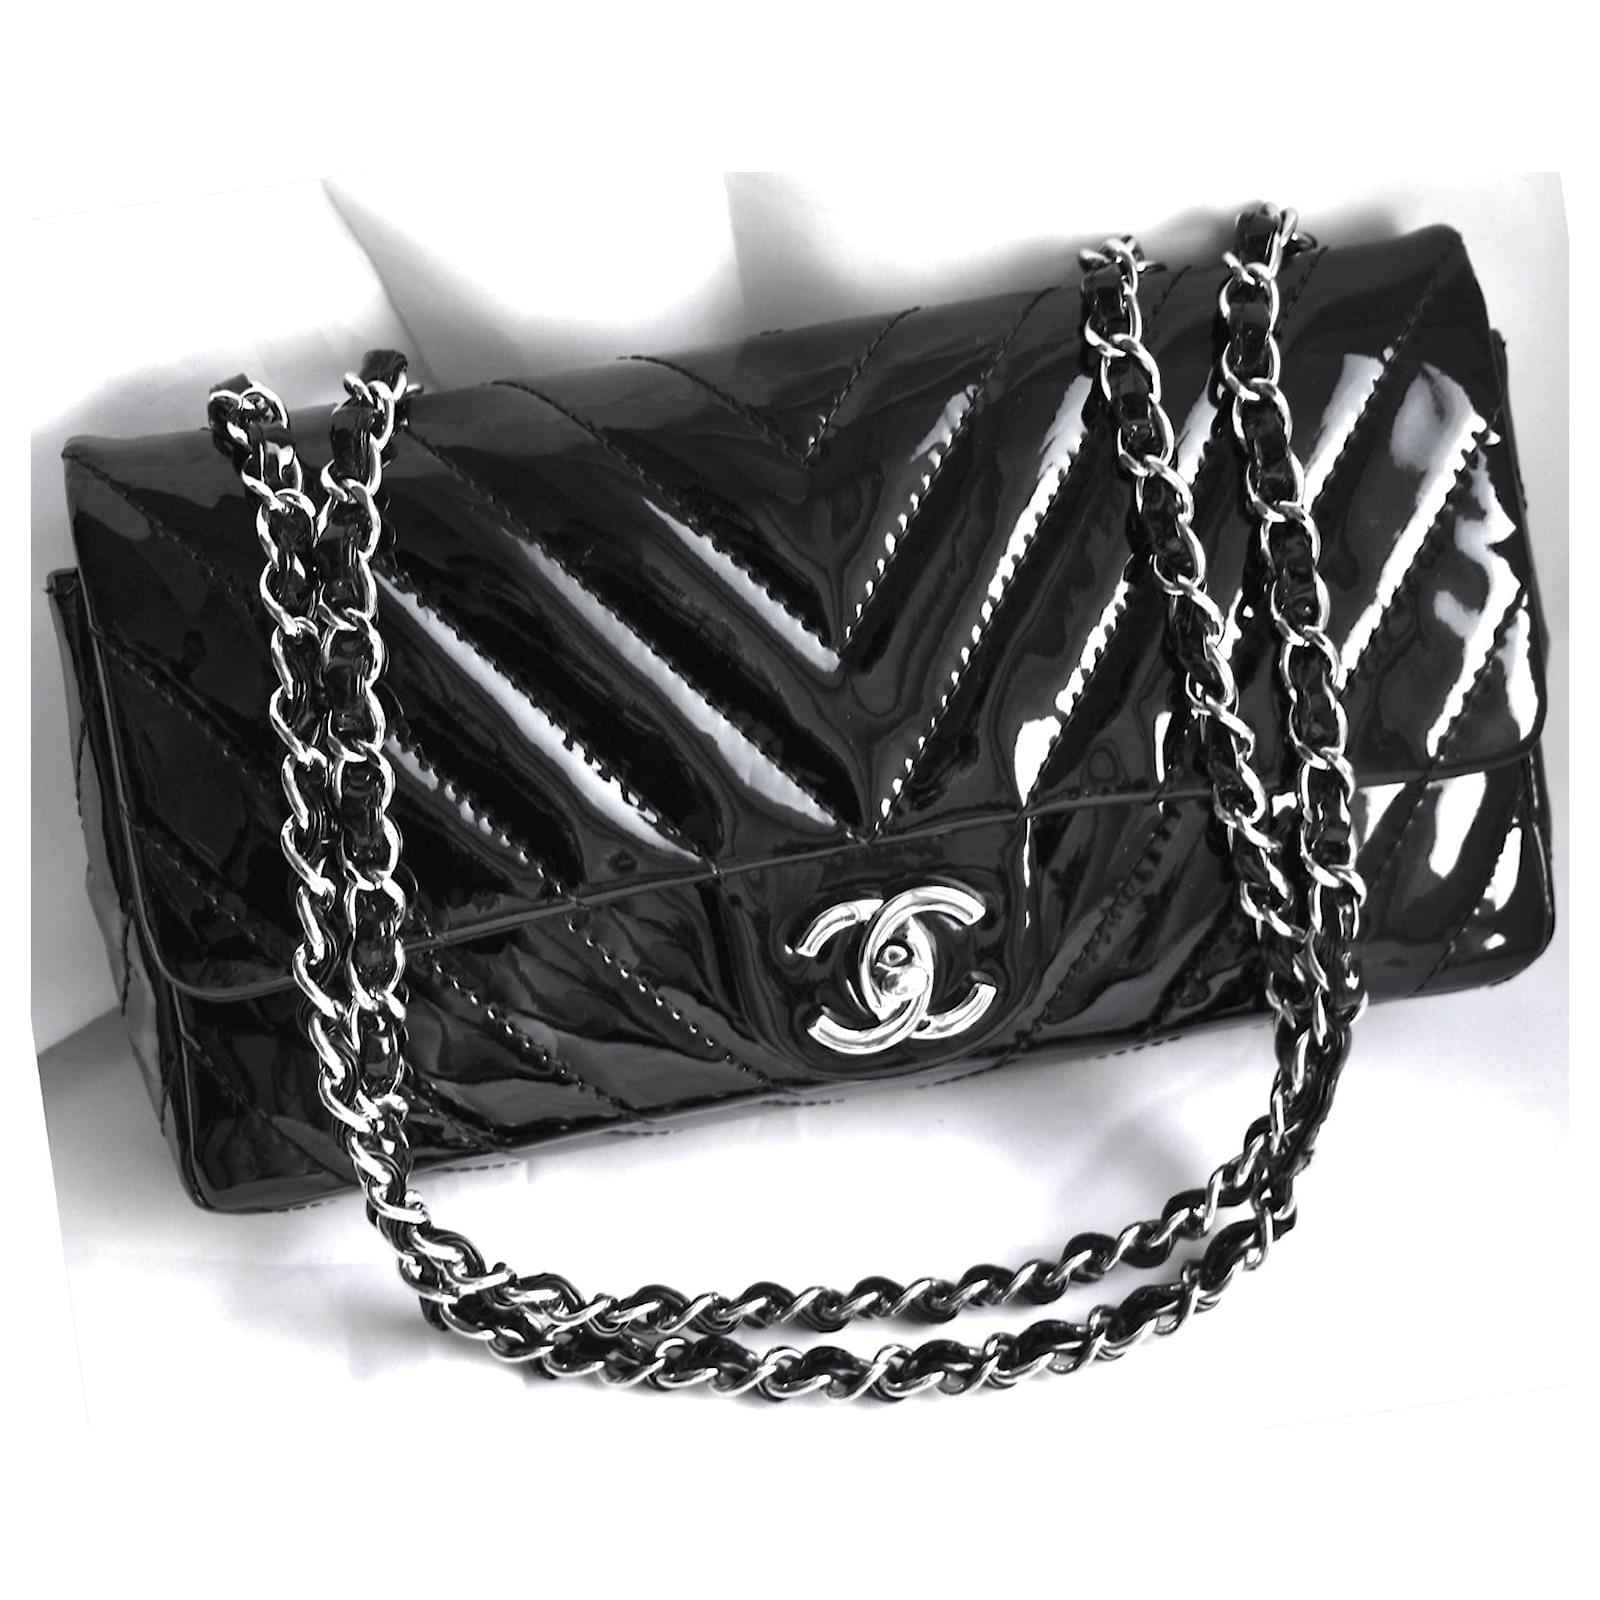 Silver Mini Chanel - 141 For Sale on 1stDibs  chanel silver mini bag, mini  chanel silver bag, mini silver chanel bag